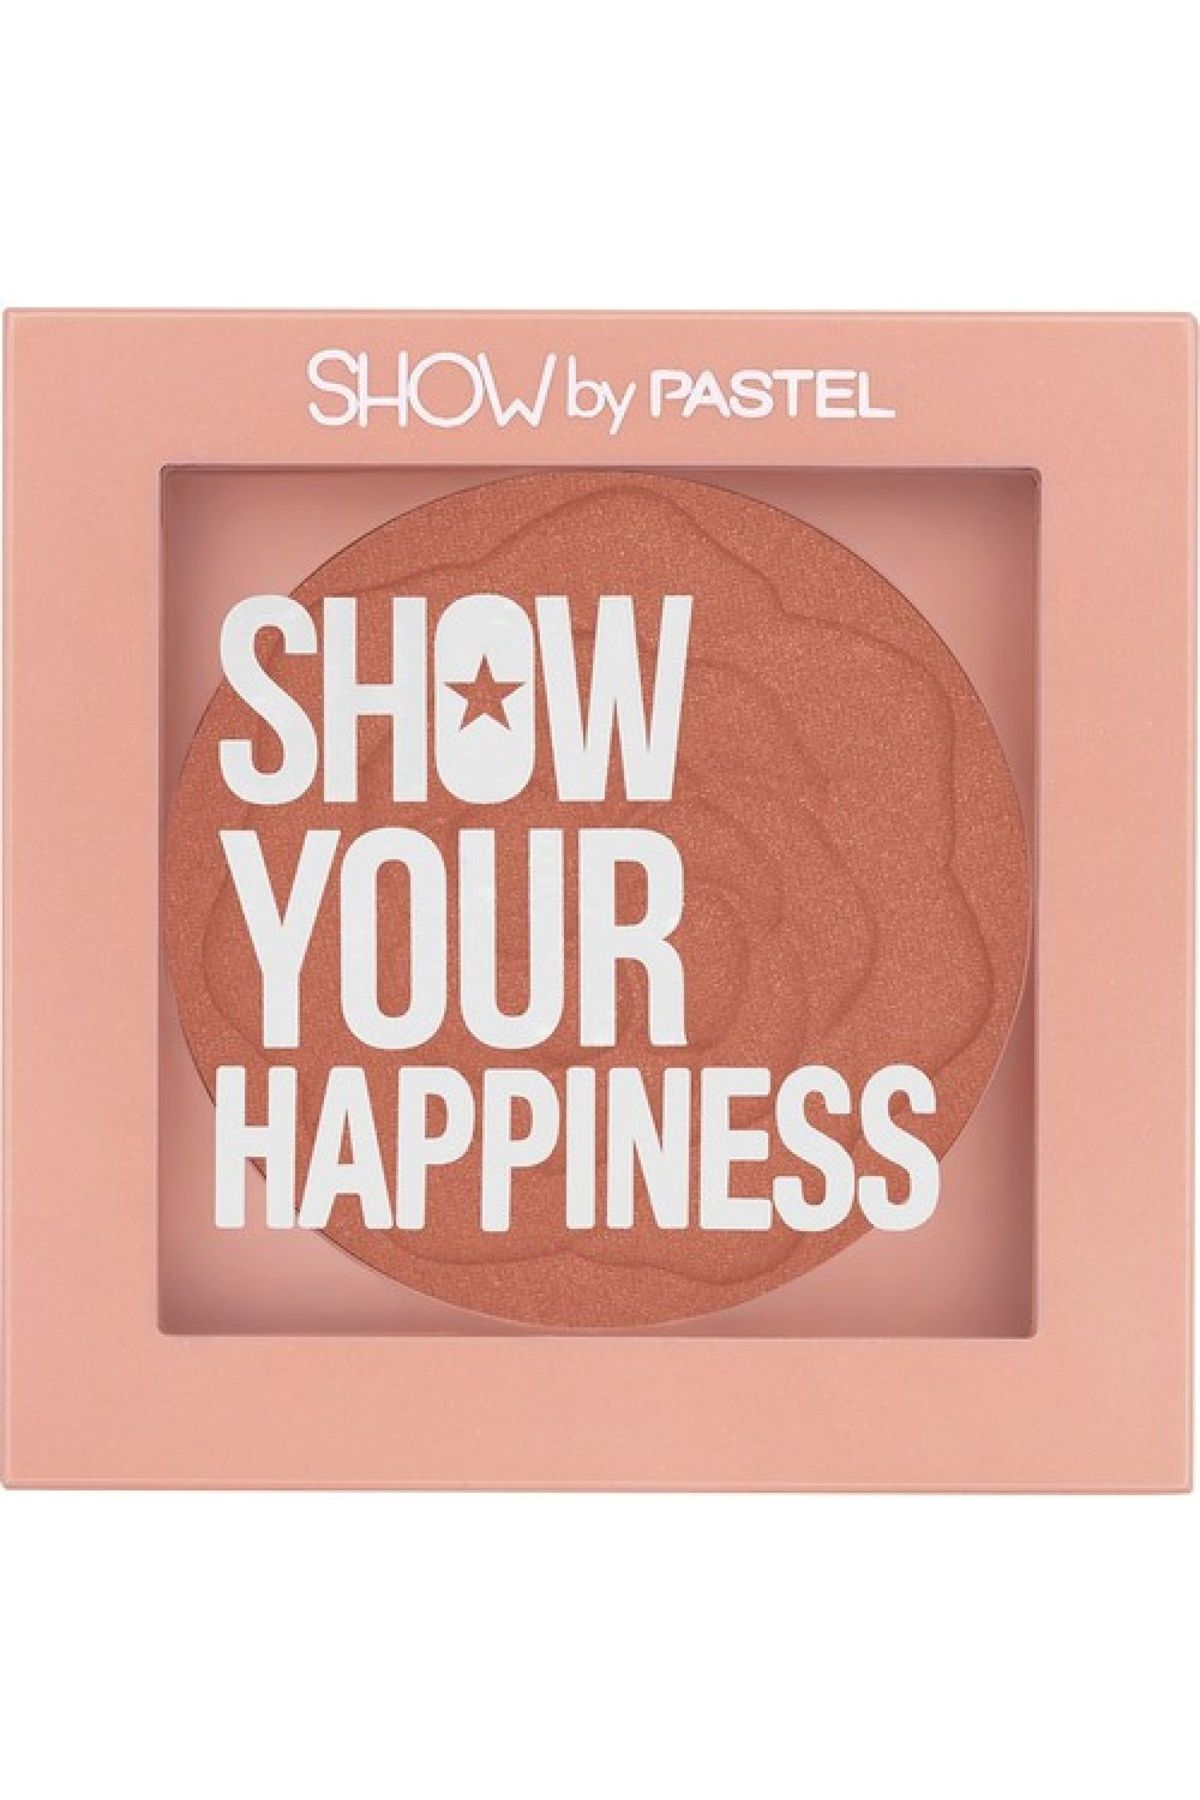 Pastel SHOW BY PASTEL SHOW YOUR HAPPINESS BLUSH 207